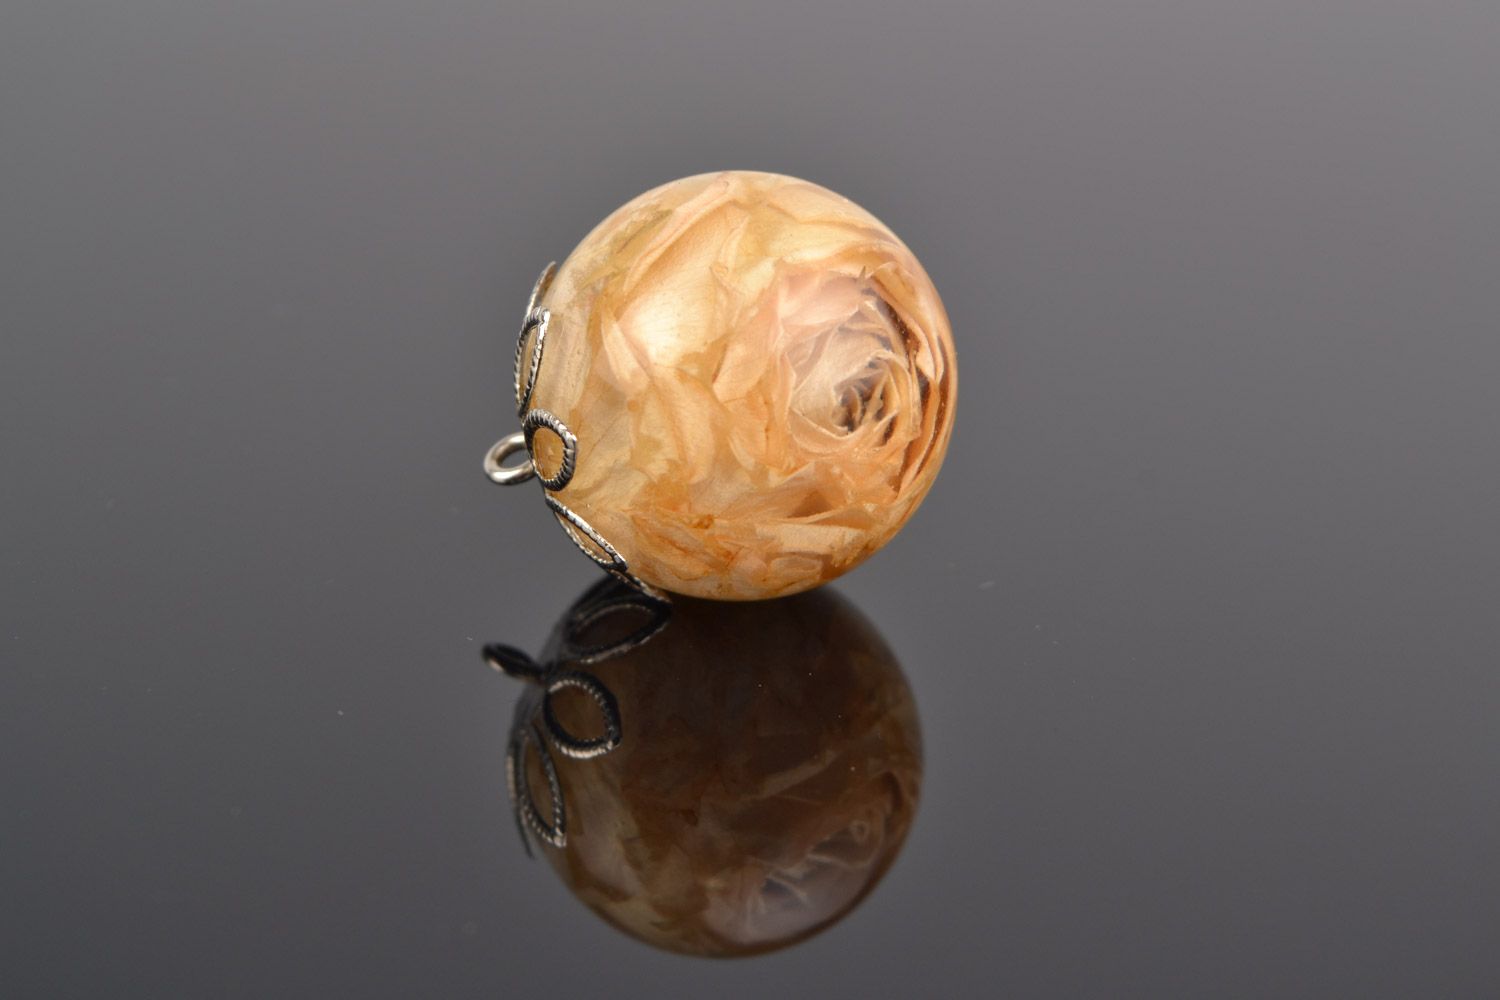 Handmade botanical pendant with rose coated with epoxy in the shape of transparent ball photo 1